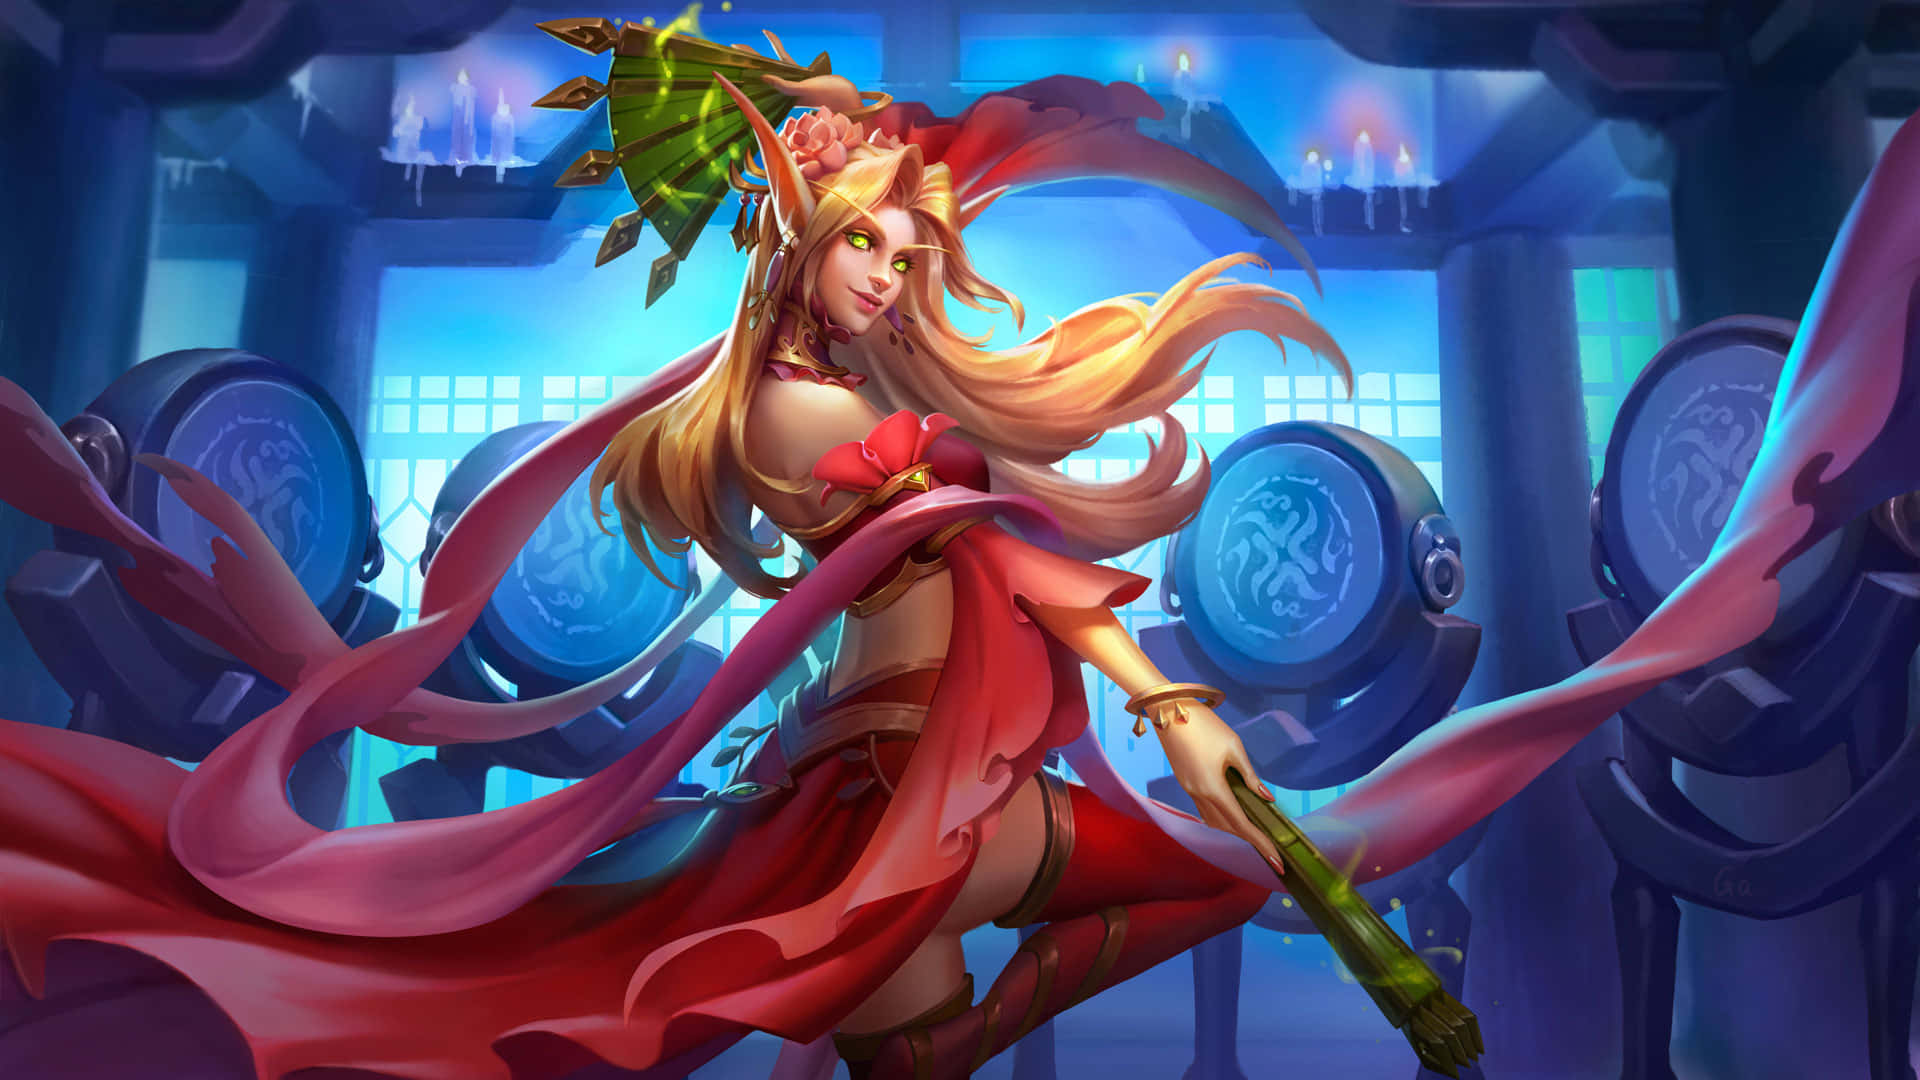 A Woman In A Red Dress With Long Hair And A Sword